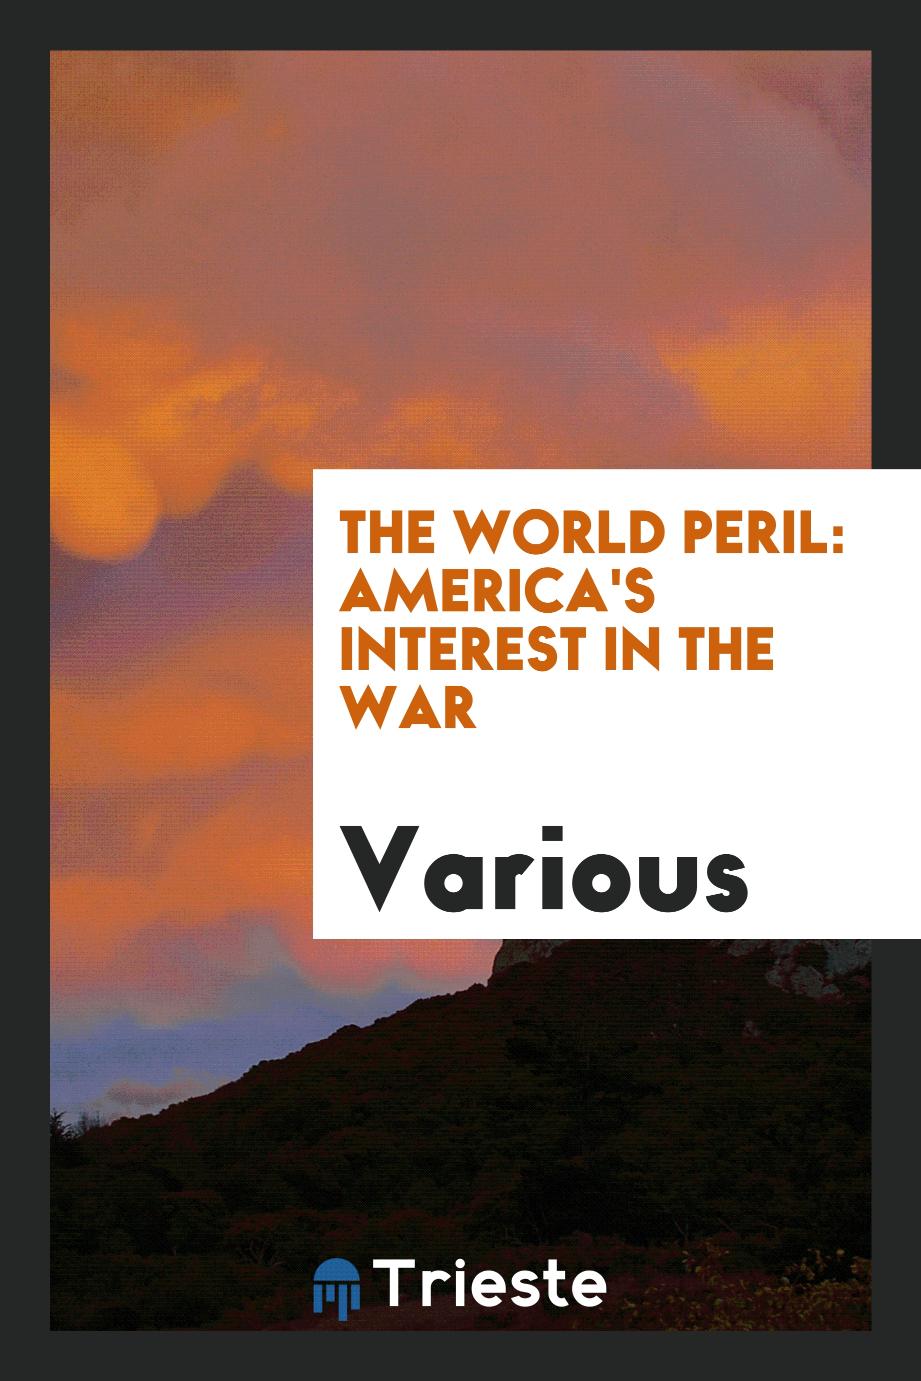 The World Peril: America's Interest in the War